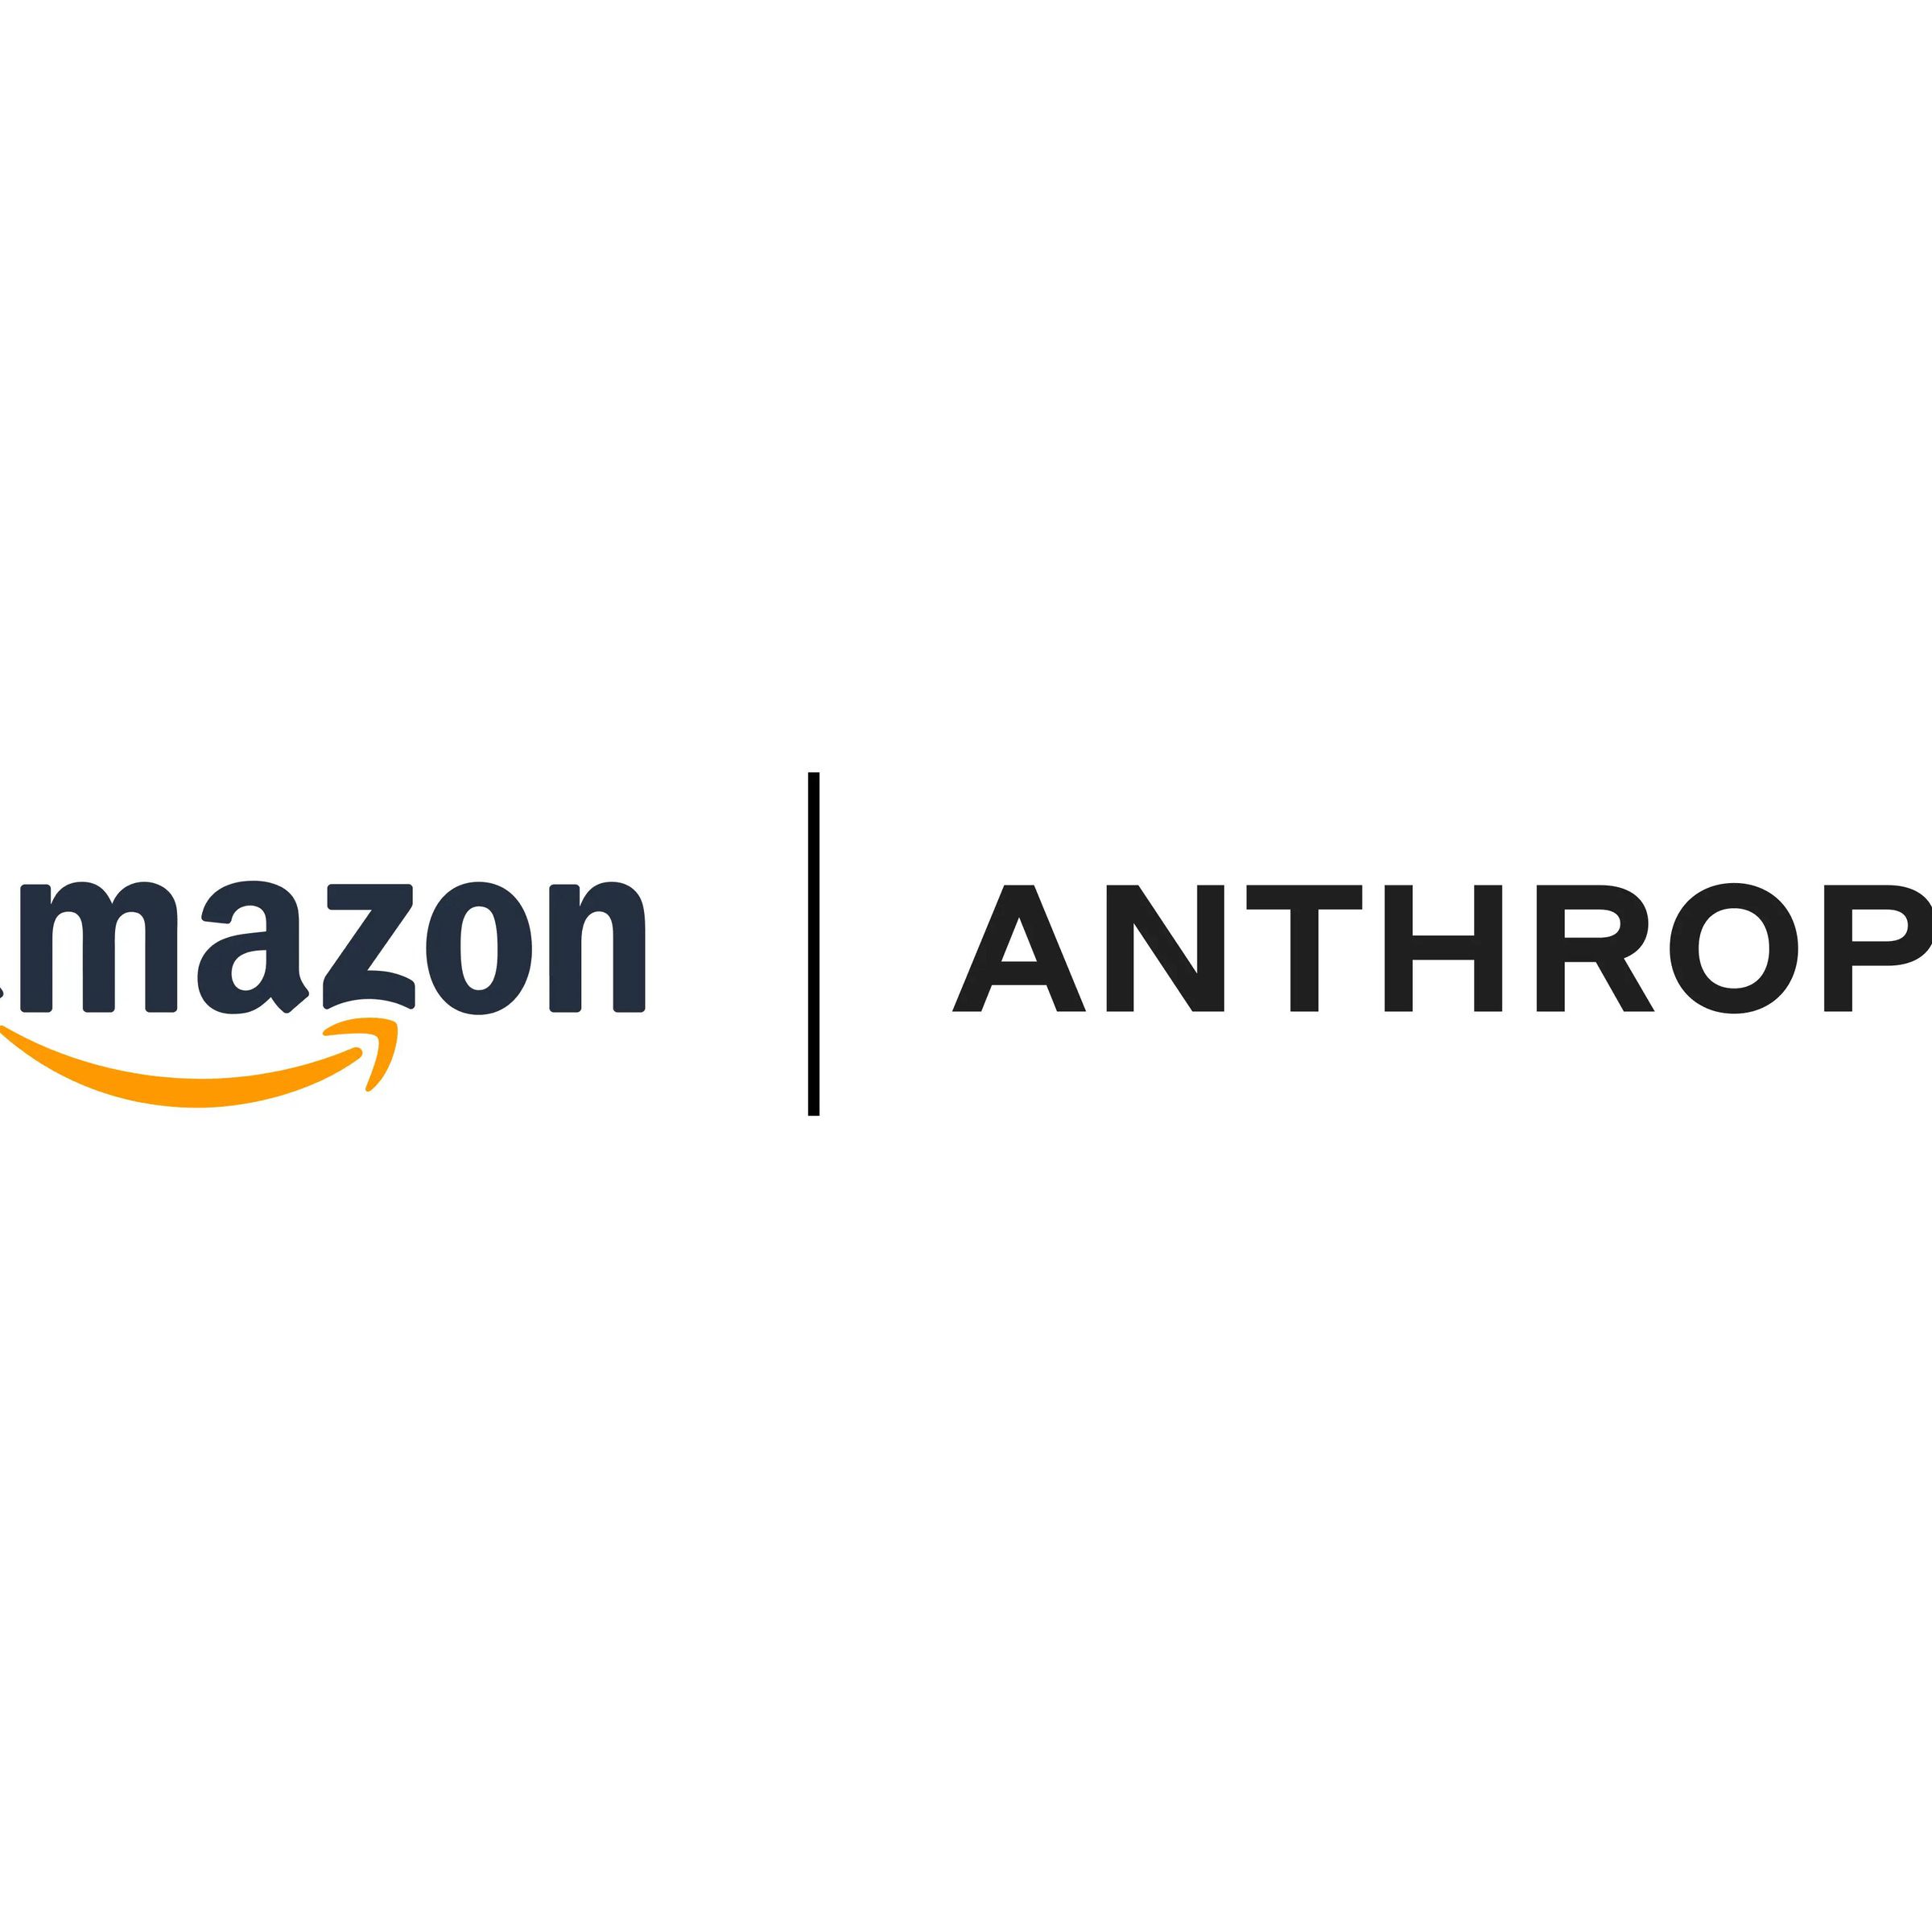 A white background with Amazon and Anthropic’s logo on.